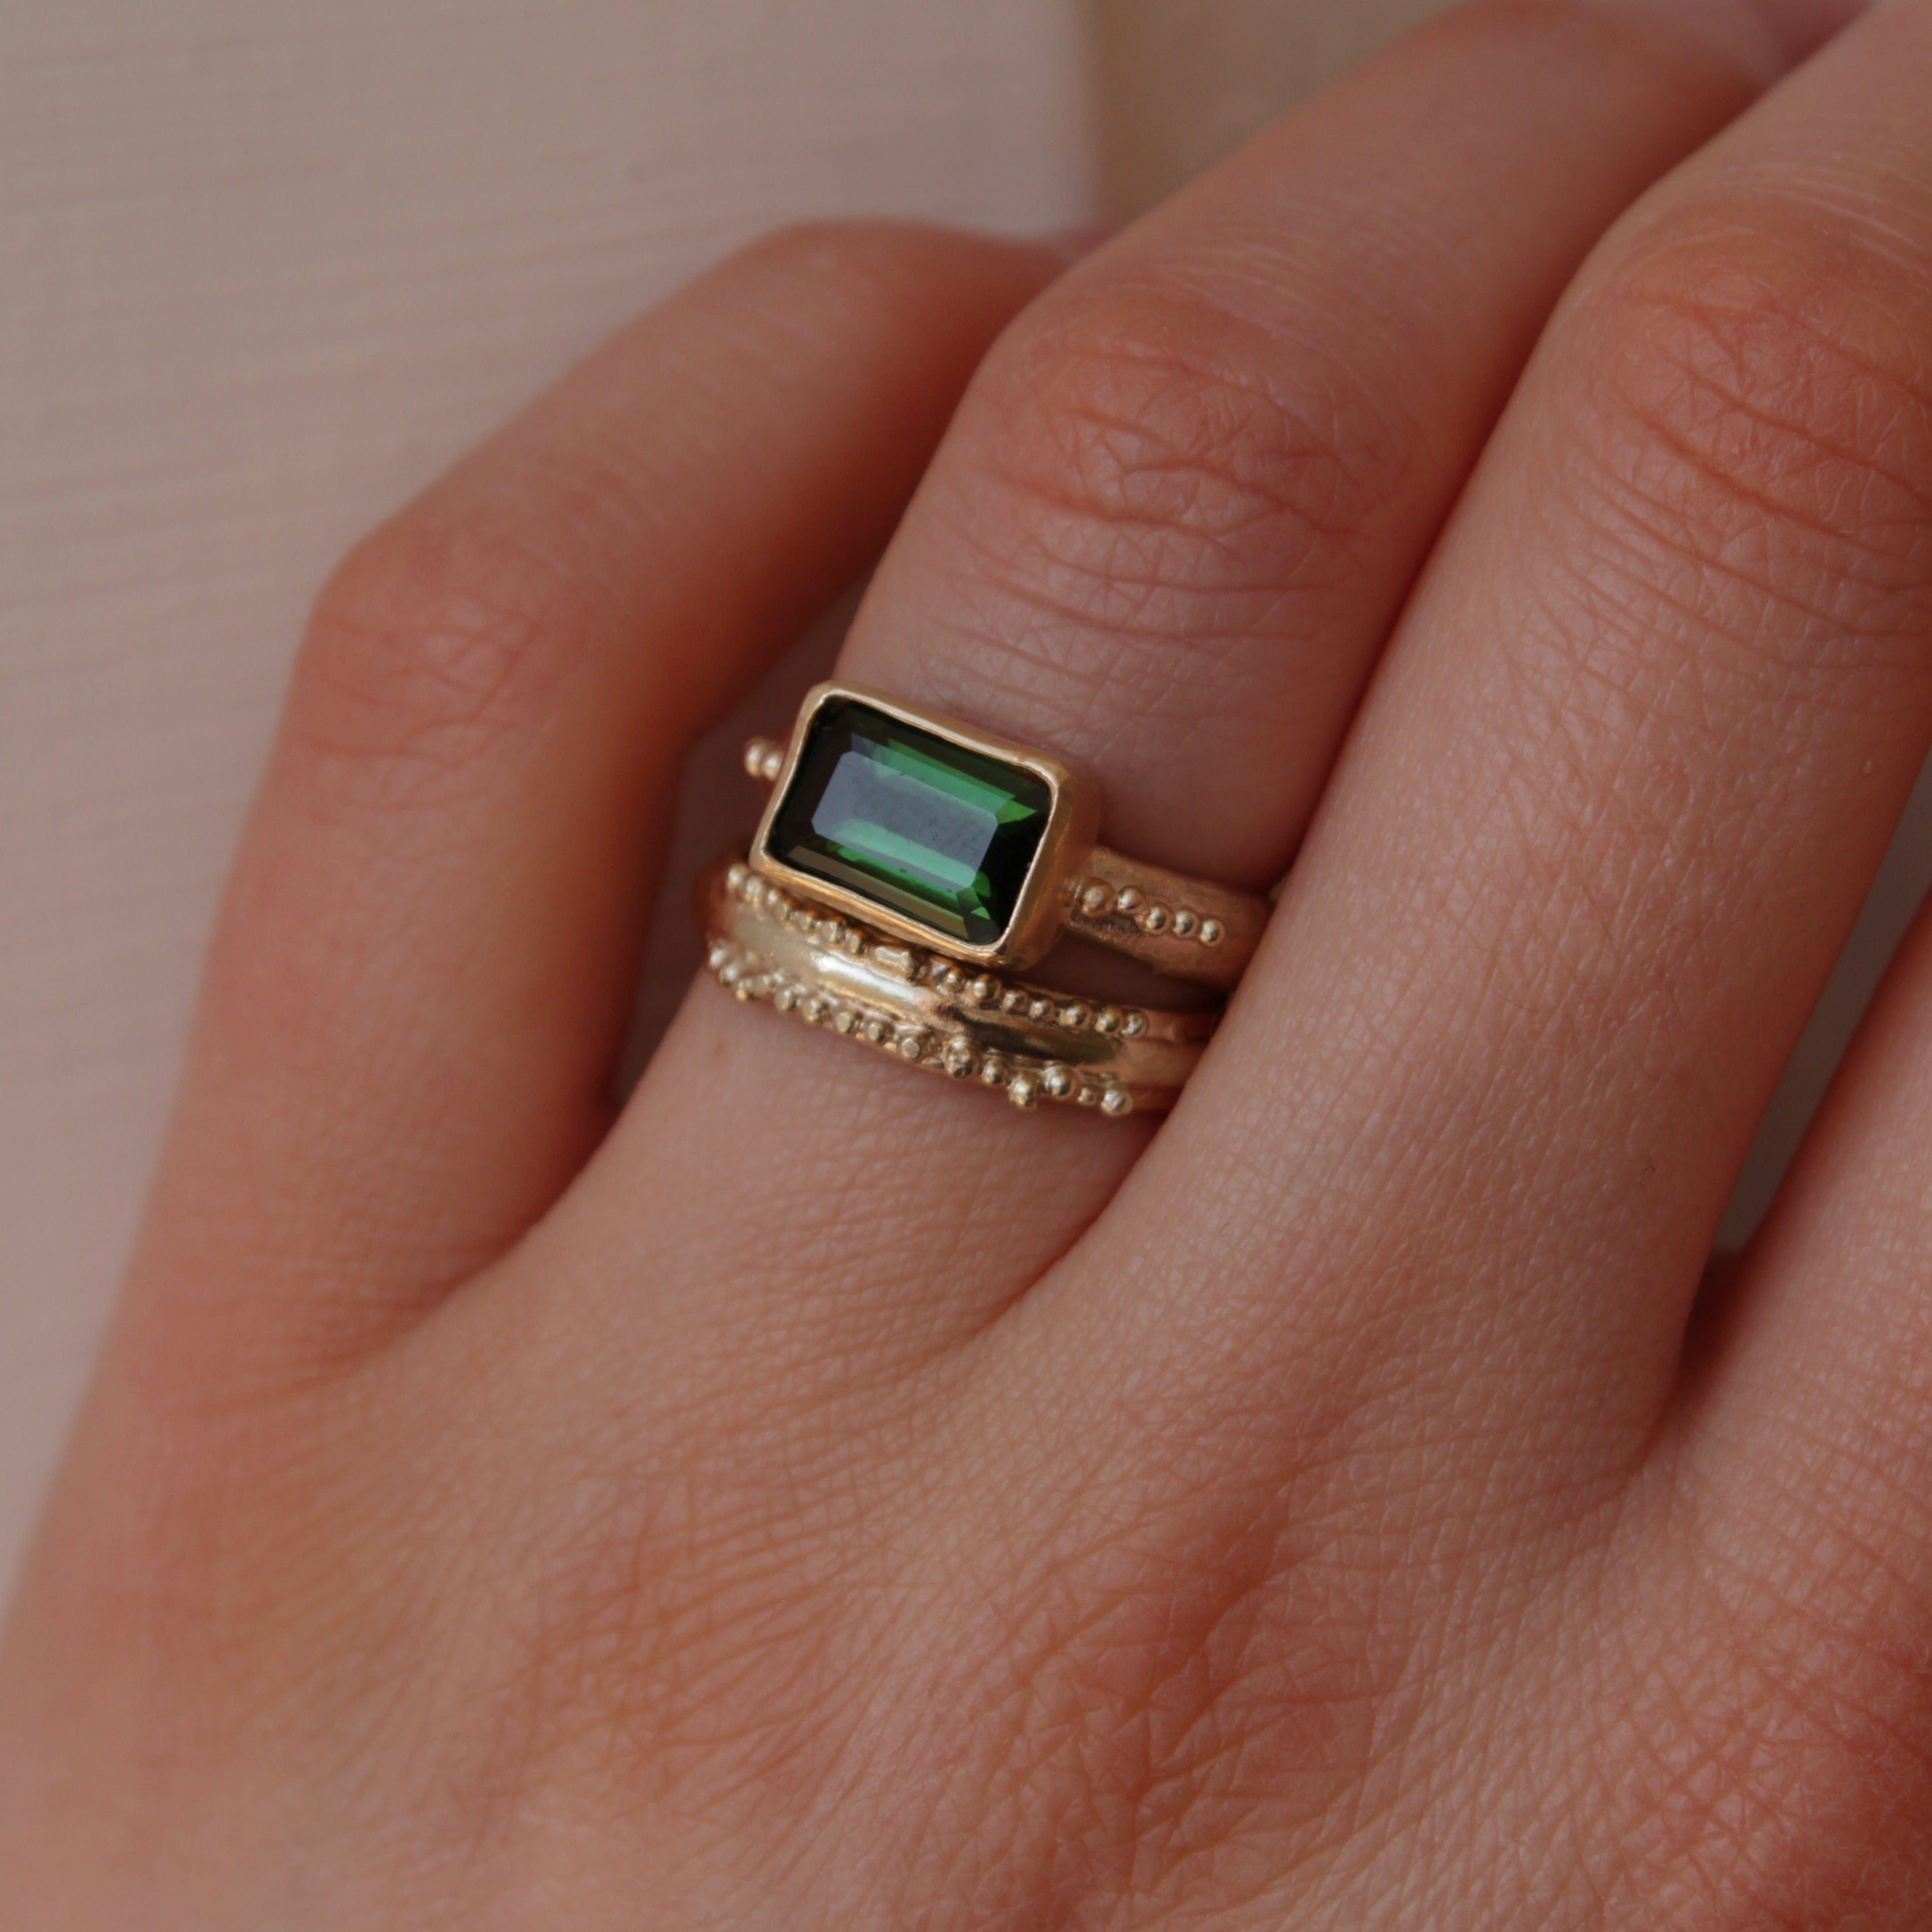 A stunning Green Tourmaline stone set on a 9 ct gold band. The band features an organic textures with tinny gold granules delicately framing the centrepiece stone.. Hand crafted alternative engagement ring by Josie Mitchell jewellery. Made in Frome, Somerset. Worn with the Ancient wedding band in 9 ct gold.